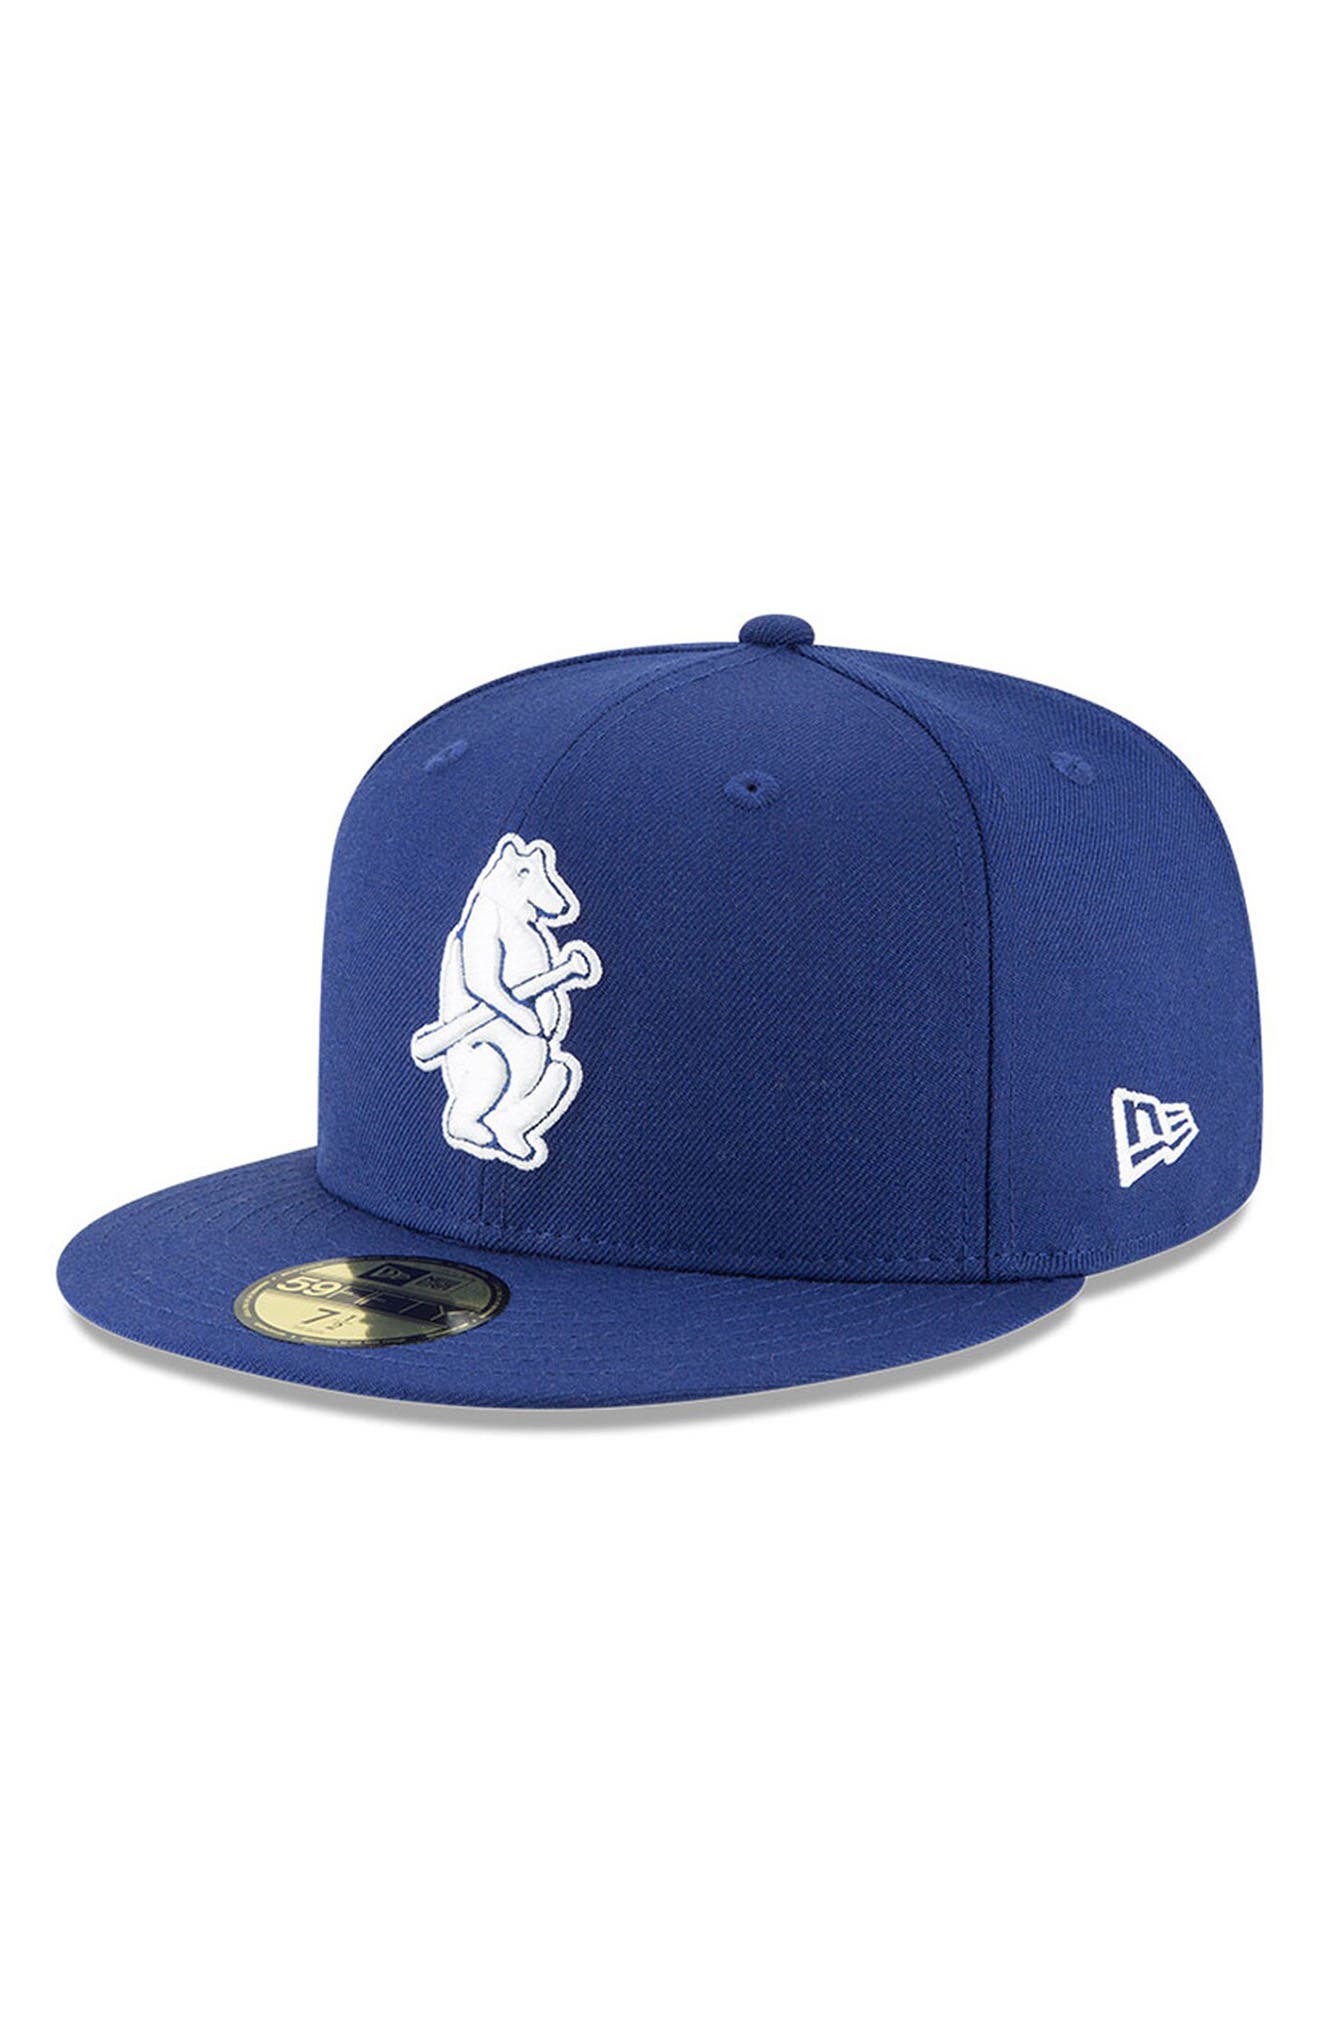 New Era Chicago Cubs Cooperstown Snapback Cap Royal 9fifty 950 Limited Edition